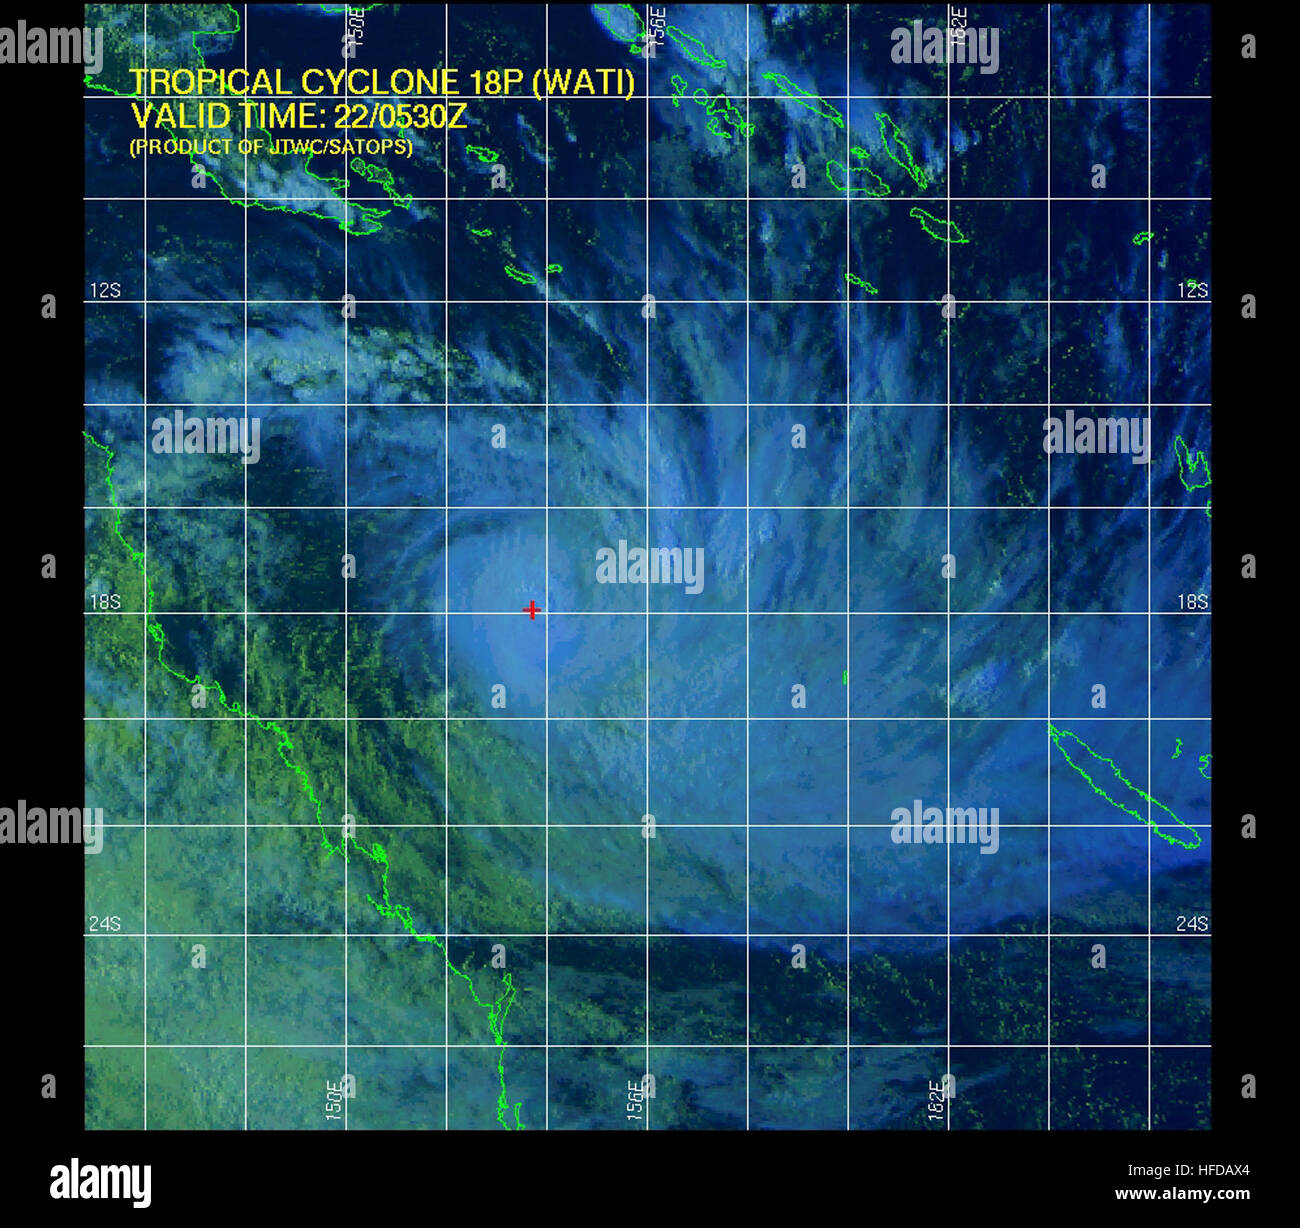 Cyclone tropical 18P (Wati) 2006-03-22 0530Z Banque D'Images